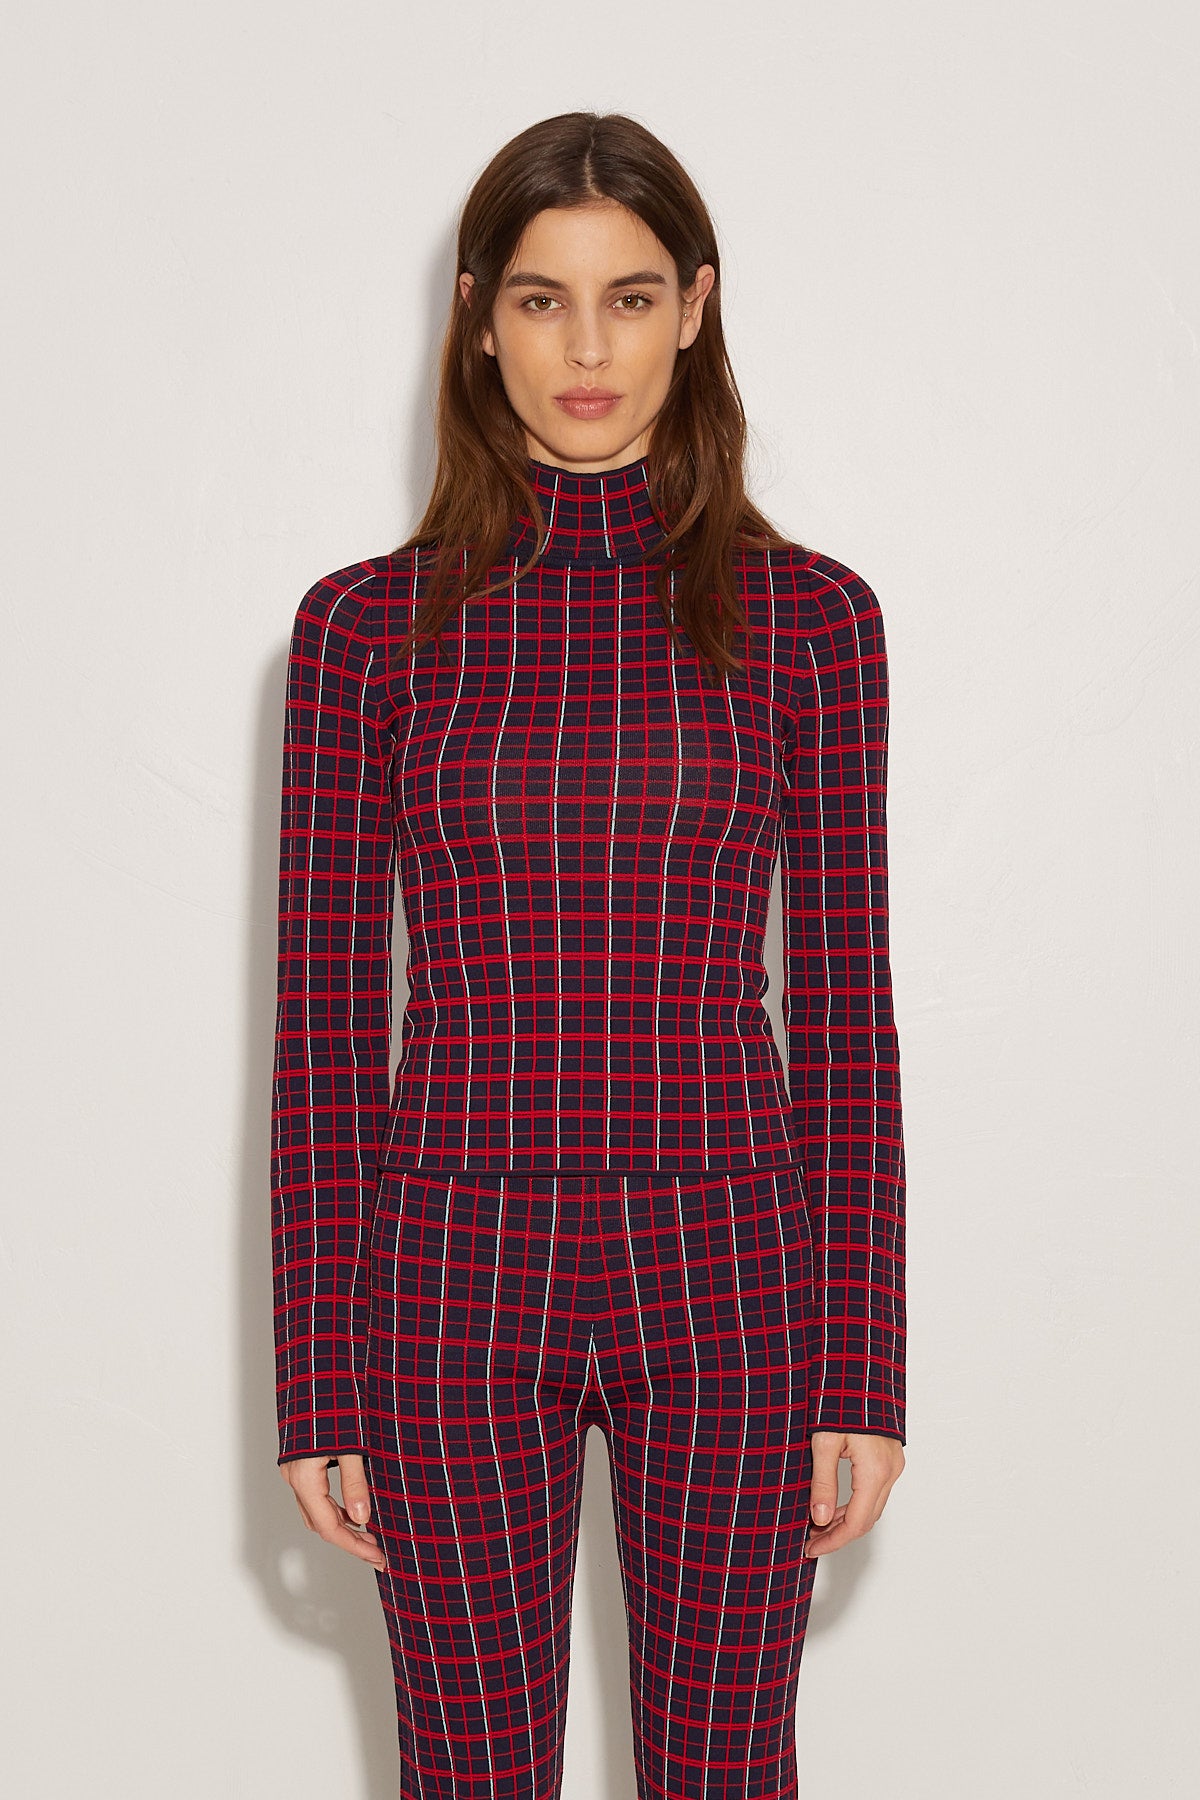 Knits By Rohe Top in Red Plaid